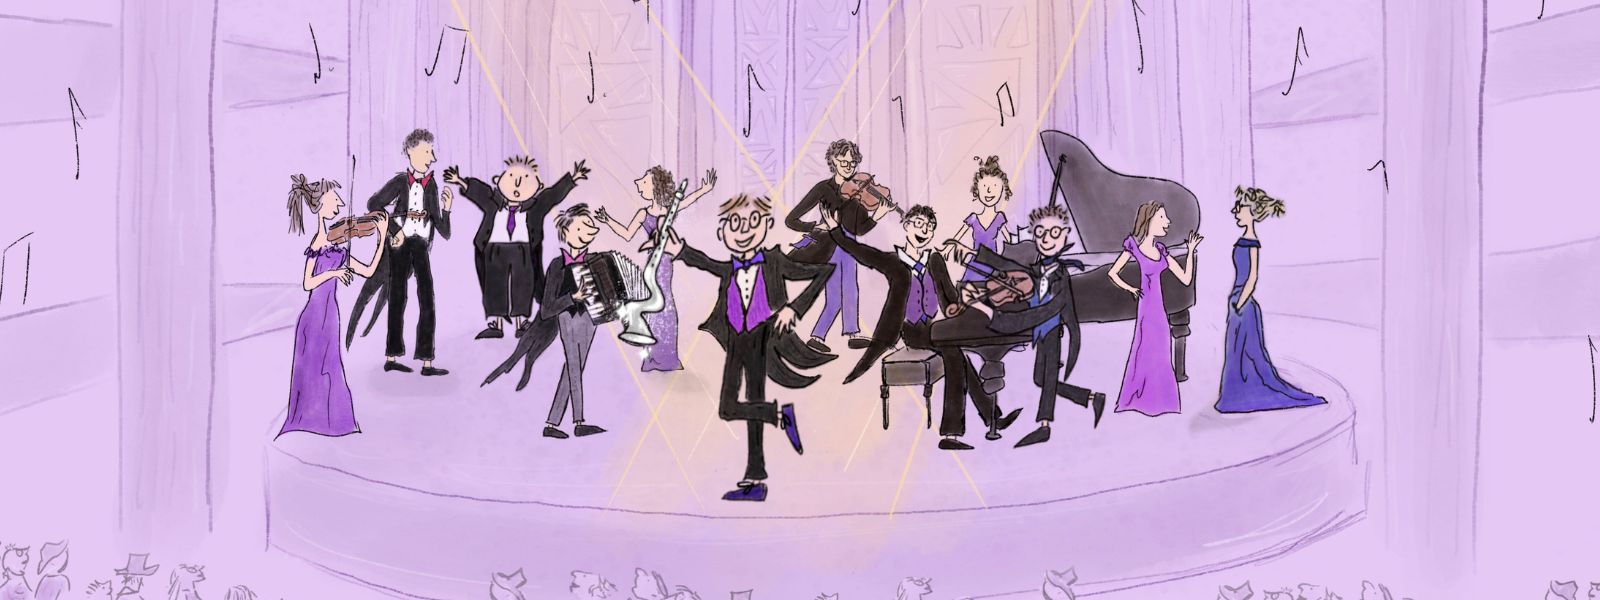 An illustration of a group of people dancing in dresses and tuxedos playing various instruments including a piano, violins and trumpet on a purple backdrop